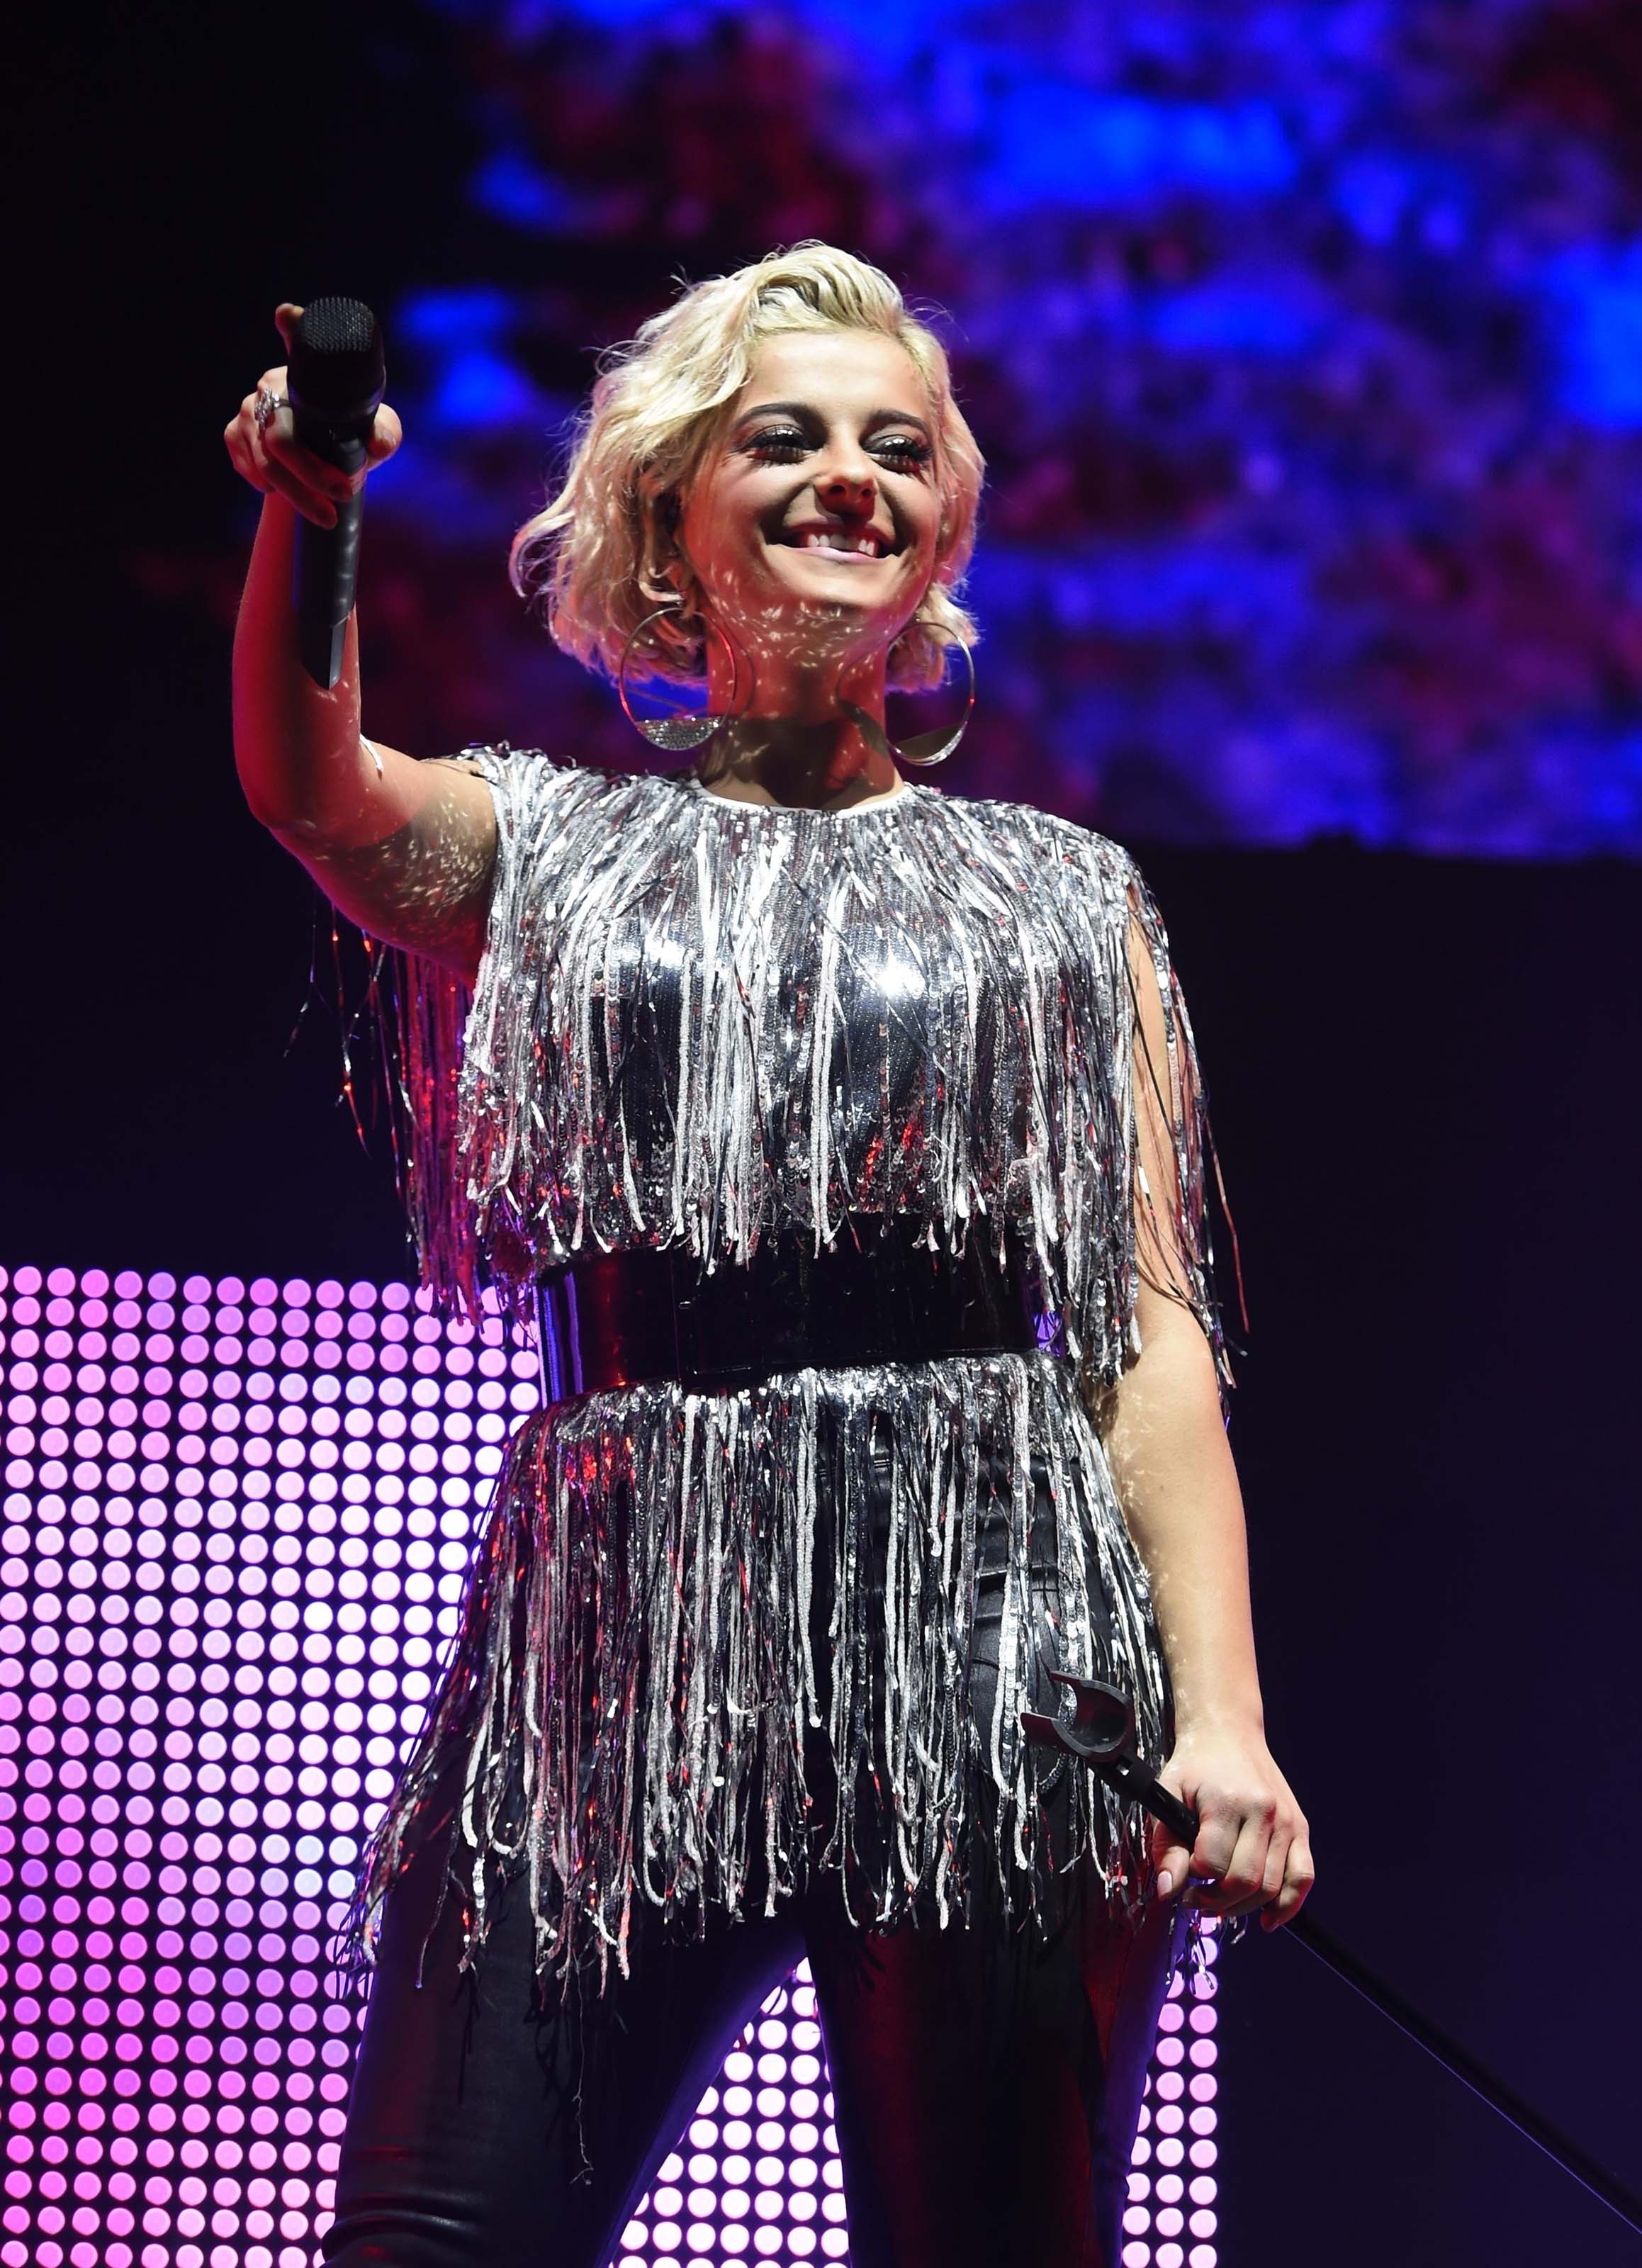 Bebe Rexha attends Free Radio Live Hits Live concert